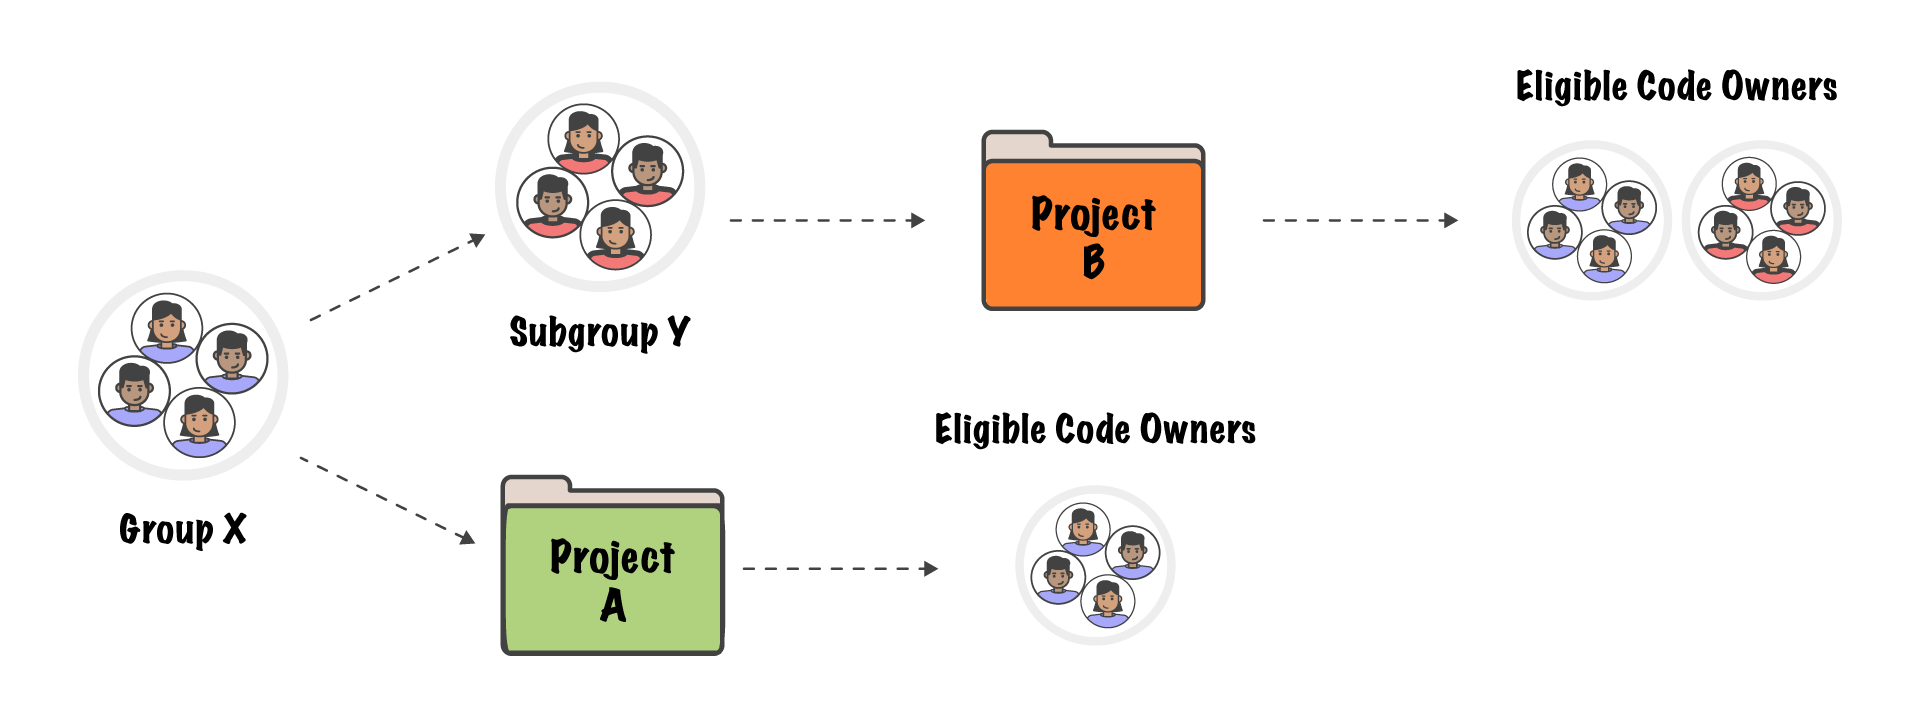 Eligible Code Owners